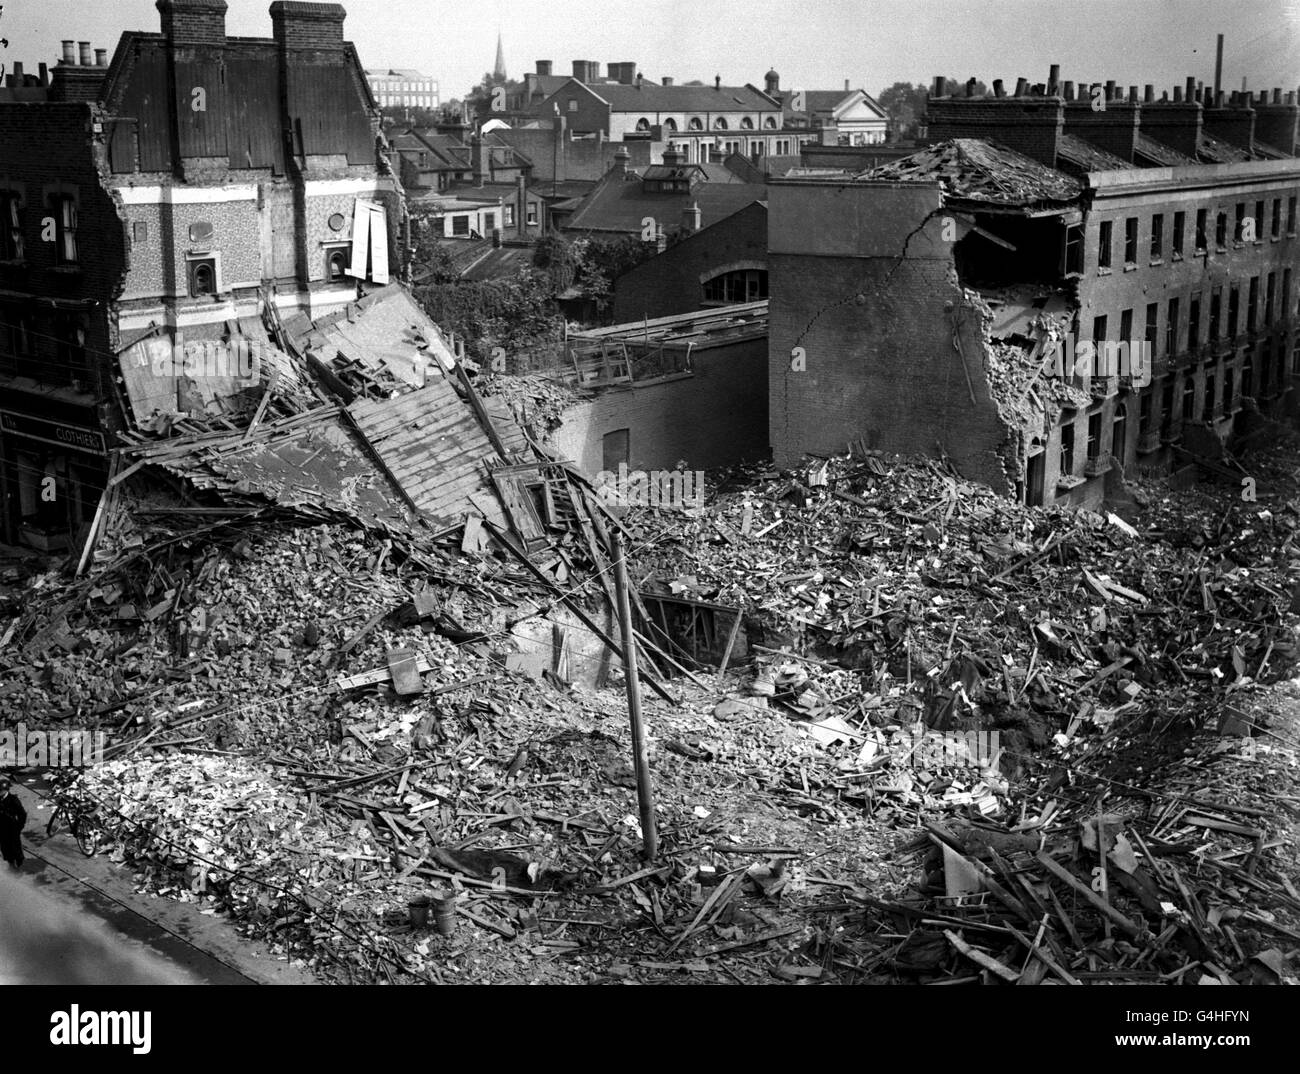 PA NEWS PHOTO 9/9/40 THE BLITZ: DAMAGE CAUSED TO LONDON'S BUILDINGS AND HOUSES FROM A GERMAN AIR RAID DURING THE SECOND WORLD WAR. 1940. Stock Photo